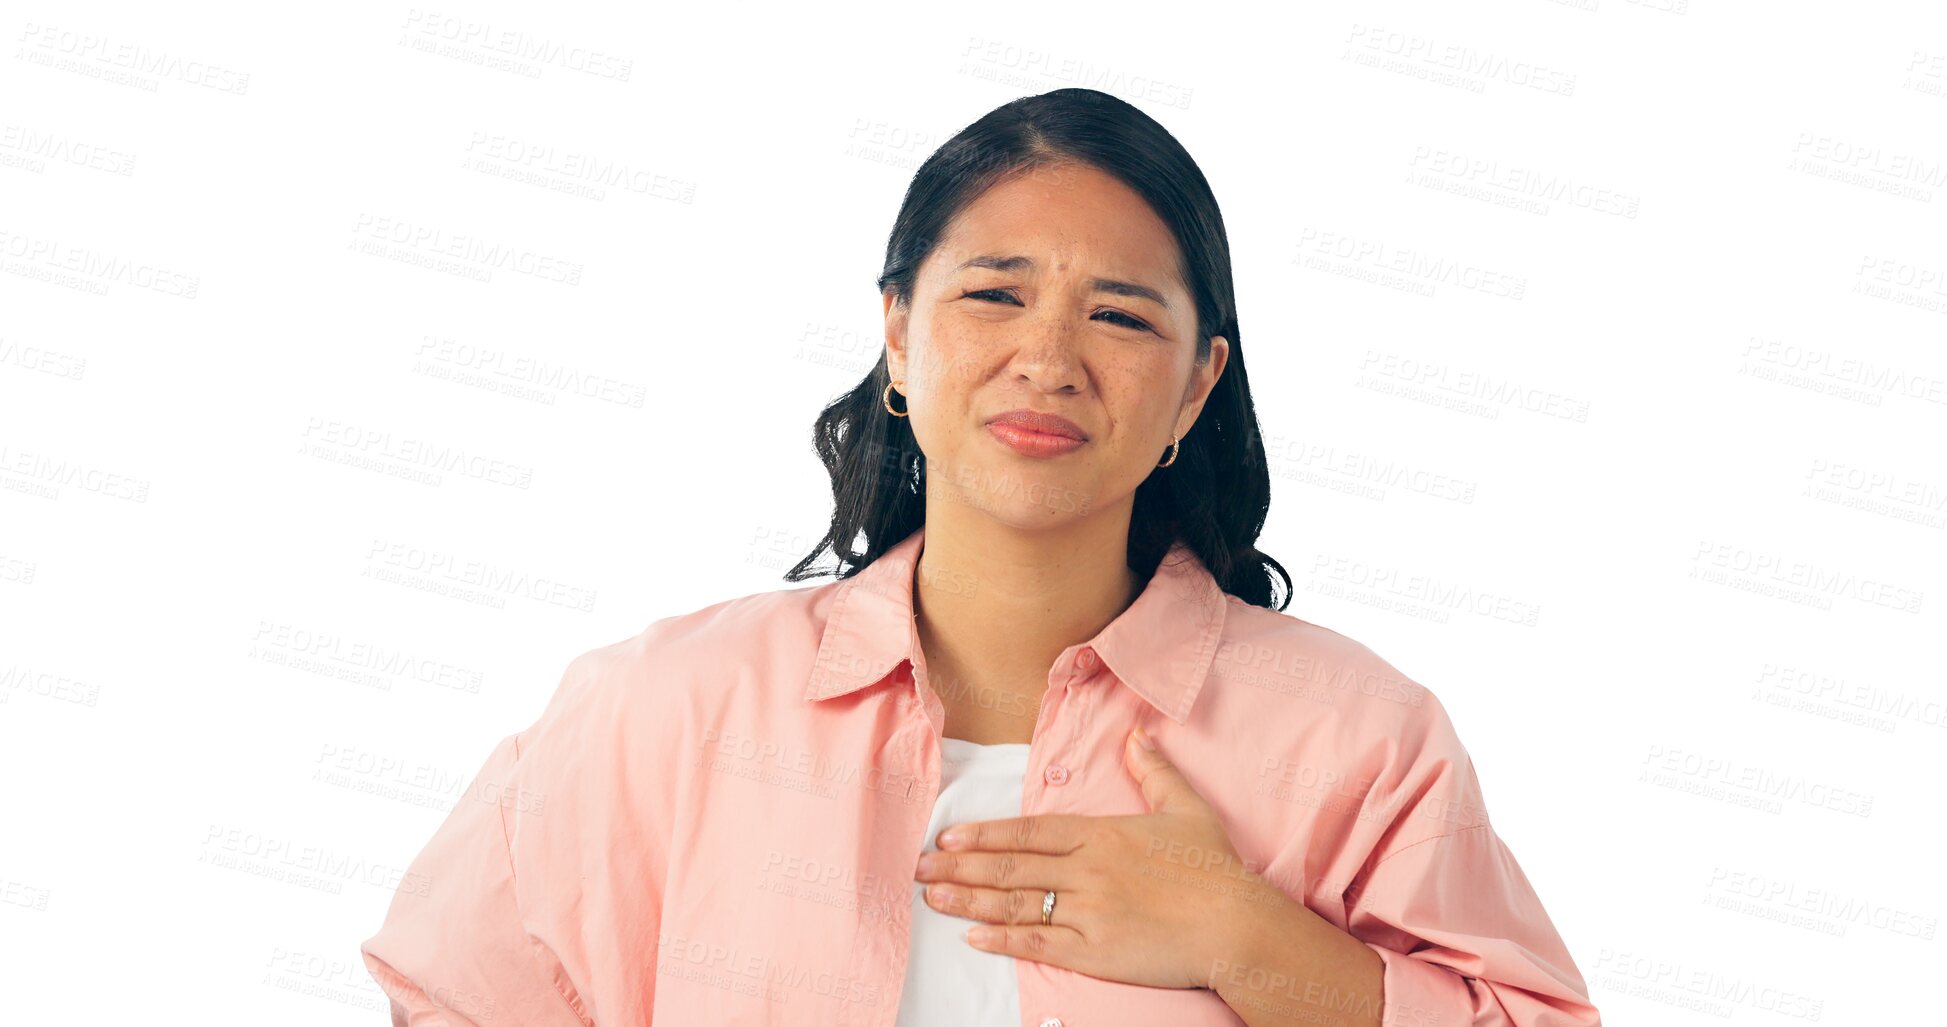 Buy stock photo Cardiology, emergency and woman with chest pain or healthcare in transparent or png background. Cardiovascular, crisis and person with asthma problem in lungs, breathing or indigestion acid reflux